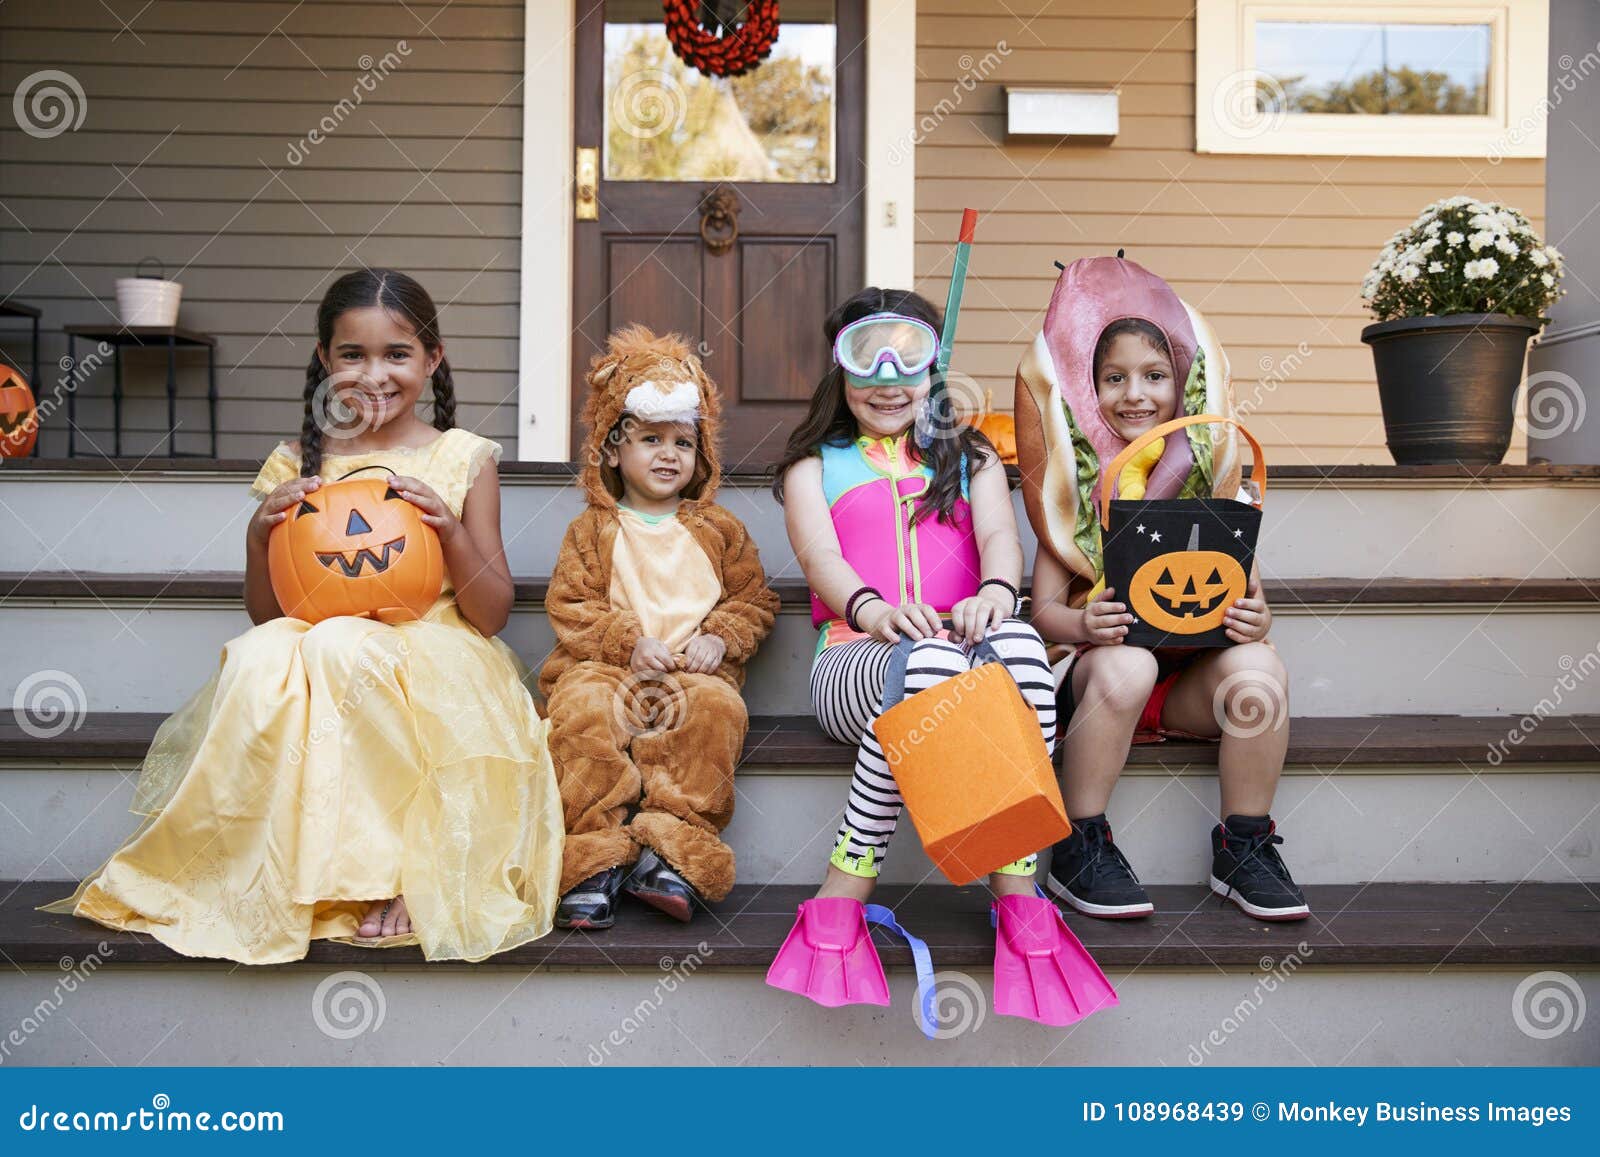 Children Wearing Halloween Costumes for Trick or Treating Stock Image ...